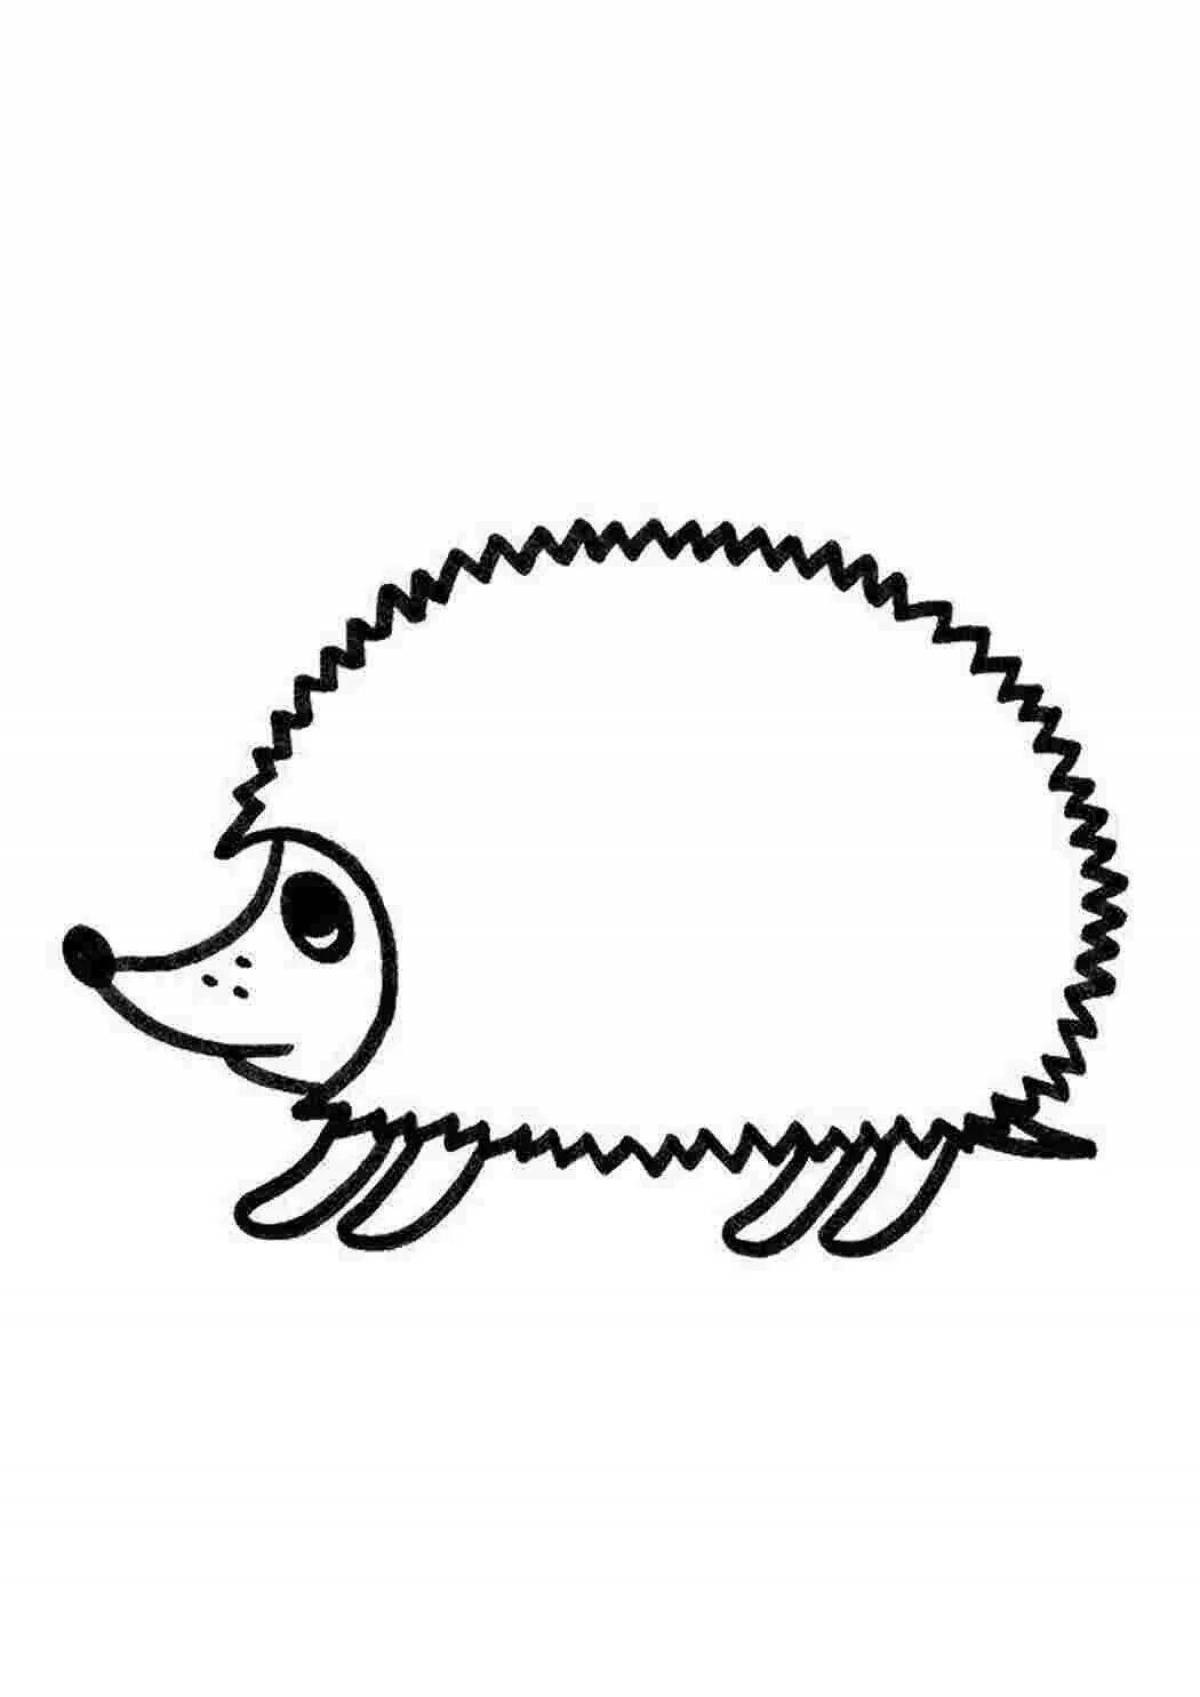 Exciting hedgehog coloring book for kids